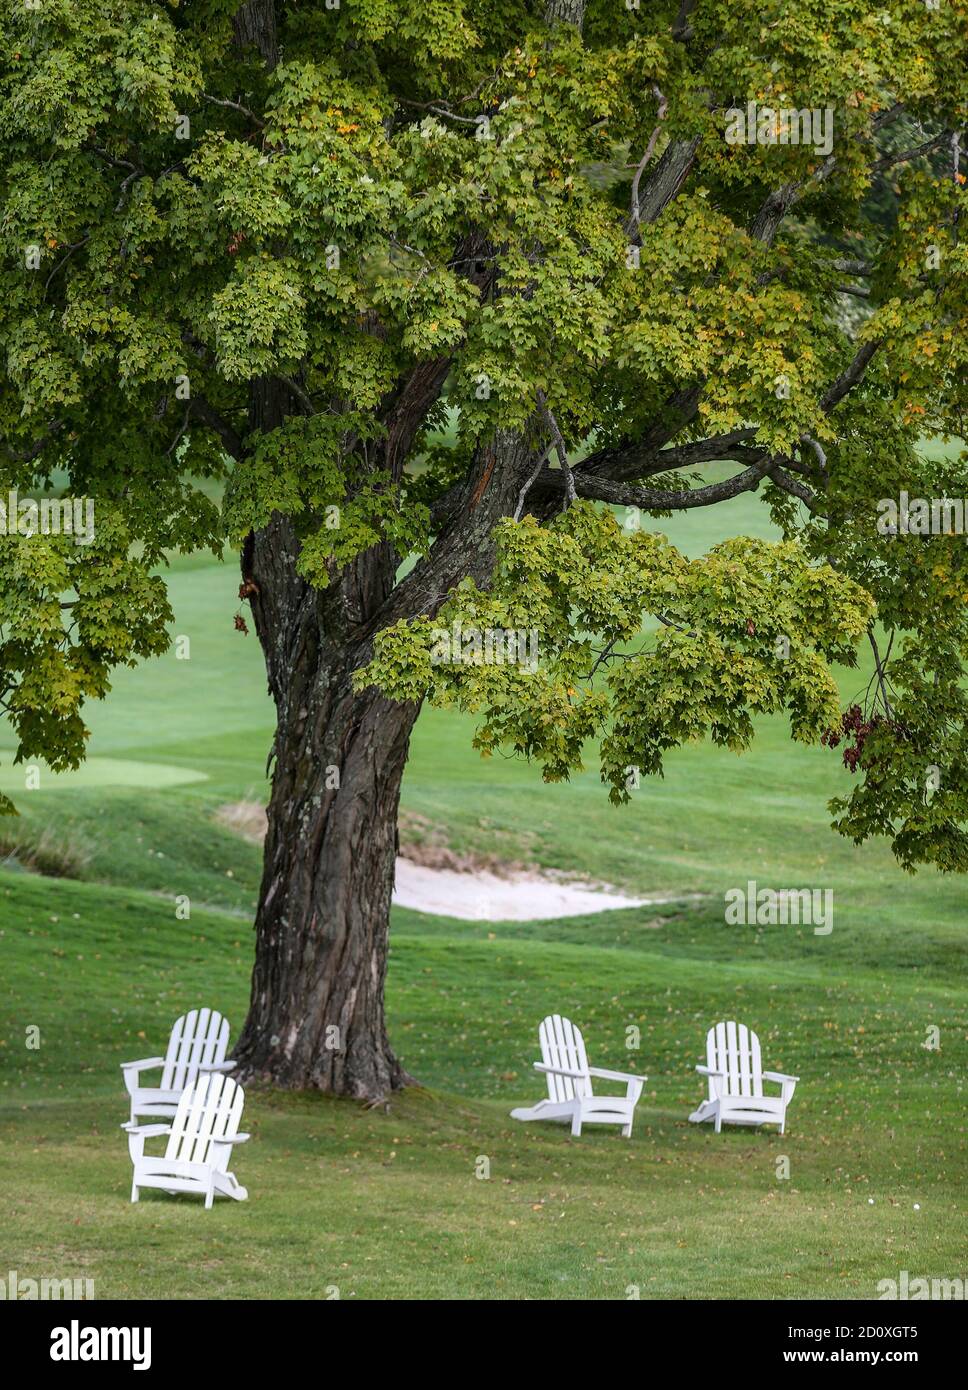 Four chairs under a tree on a summer day Stock Photo